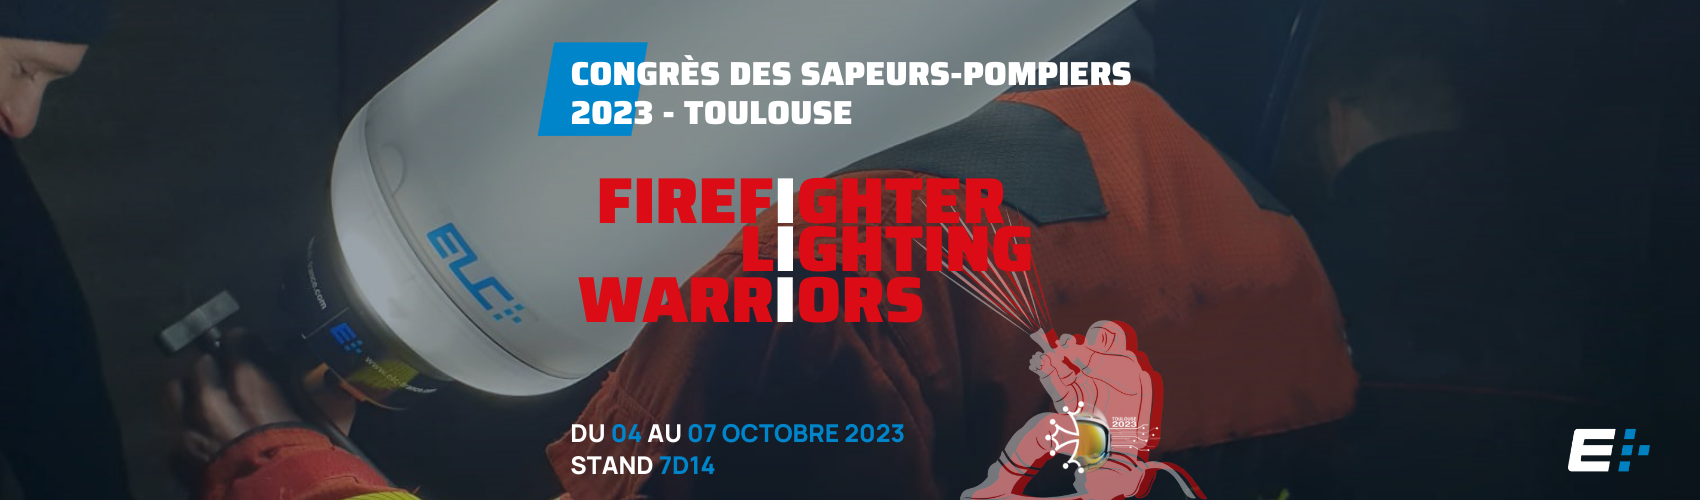 Feuerwehrkongress 2023 - TOULOUSE